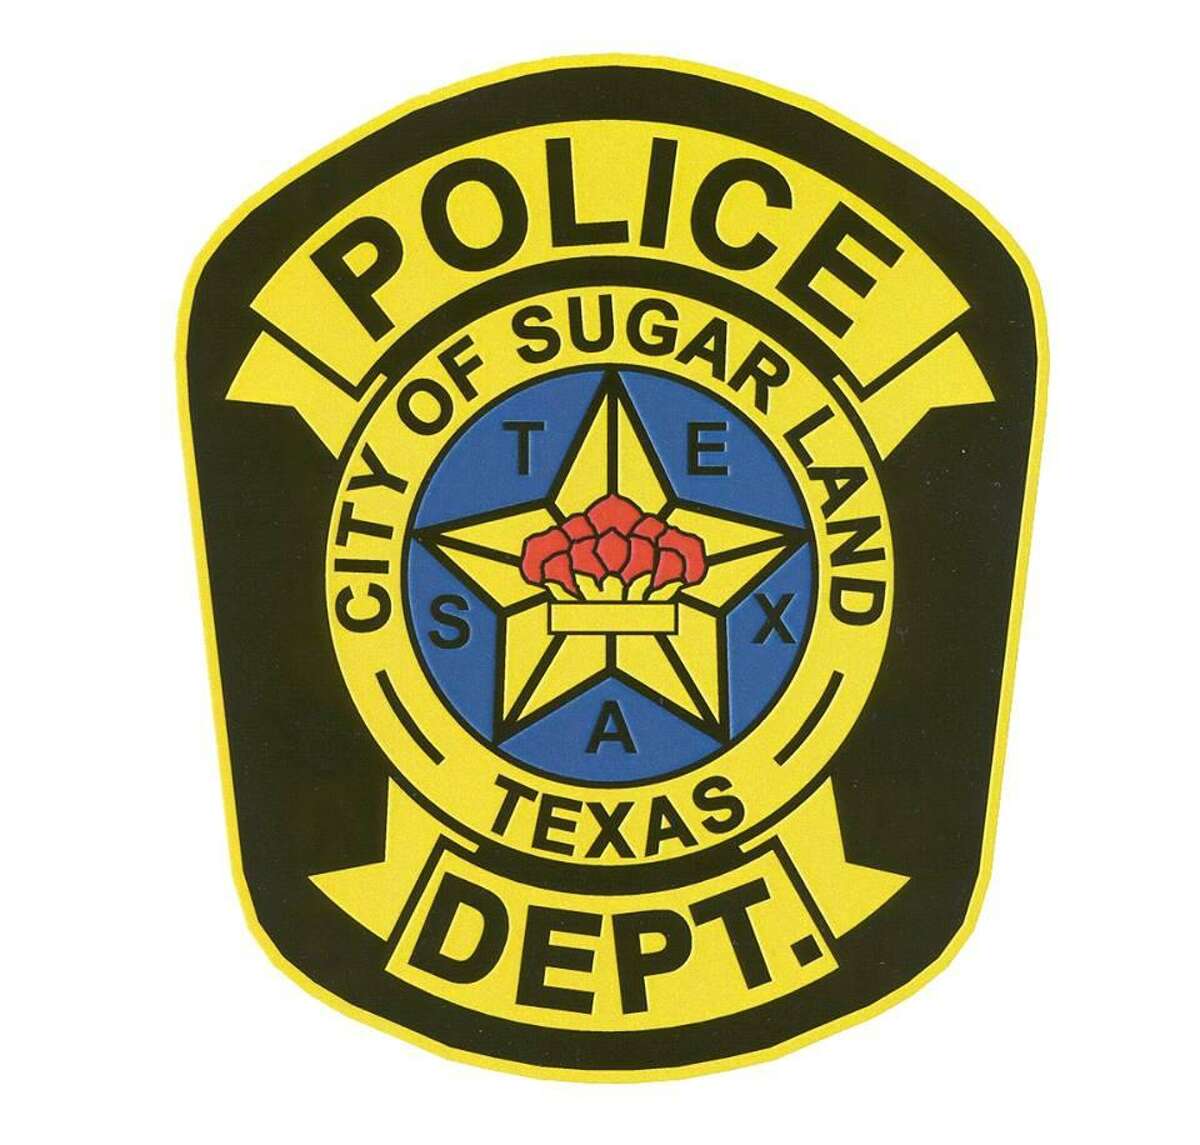 Sugar Land Police Department  Total stops: 40,596  Stops with use of force: 9   Use of force rate per 10,000 stops: 2.22  (Rates calculated by Grits for Breakfast) 